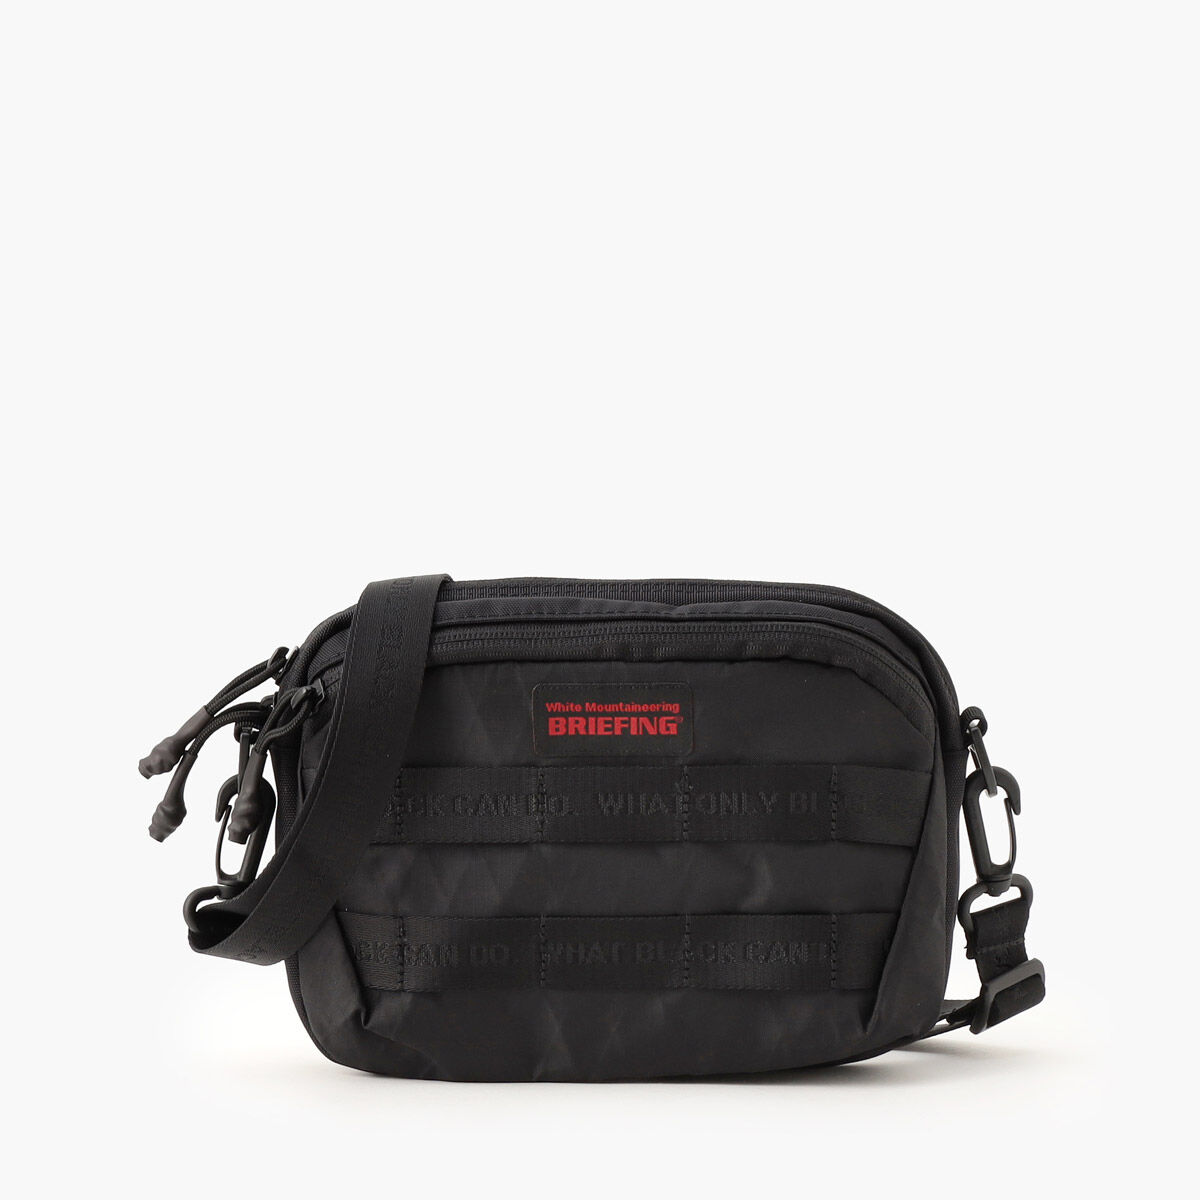 White Mountaineering | BRIEFING | Premium Bags and Luggage